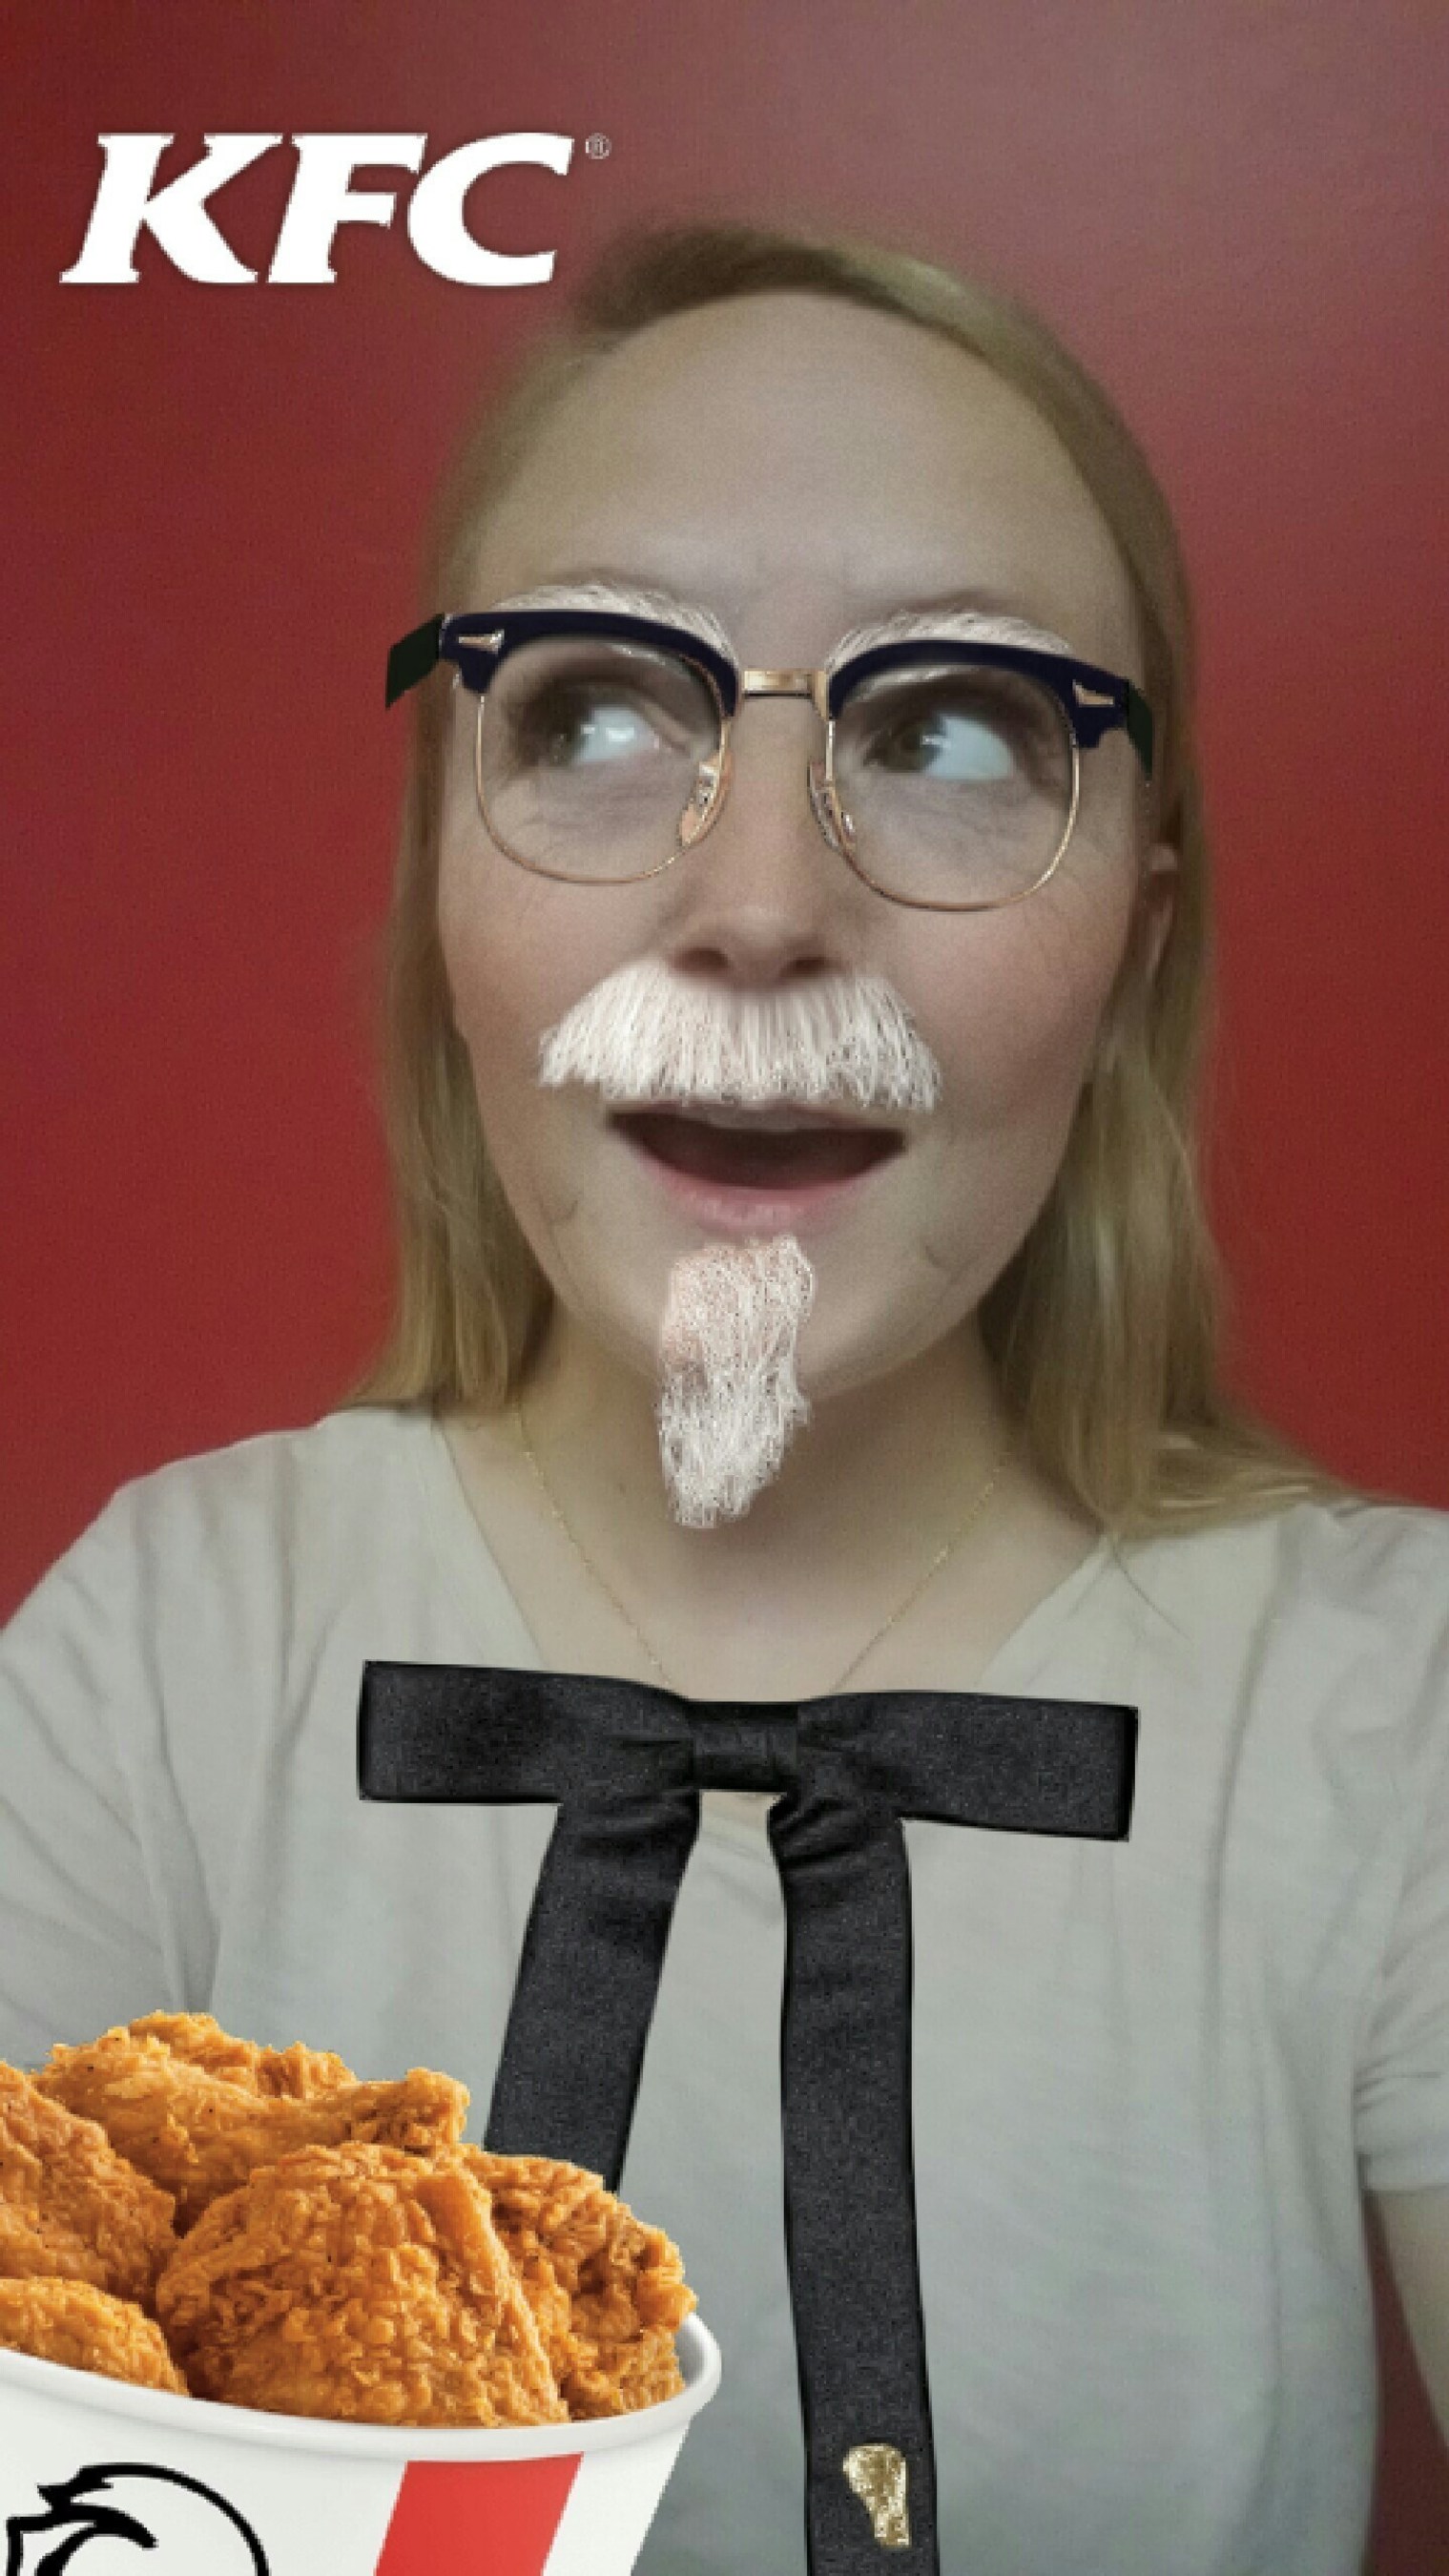 "Colonelize" yourself with the KFC Snapchat Lens